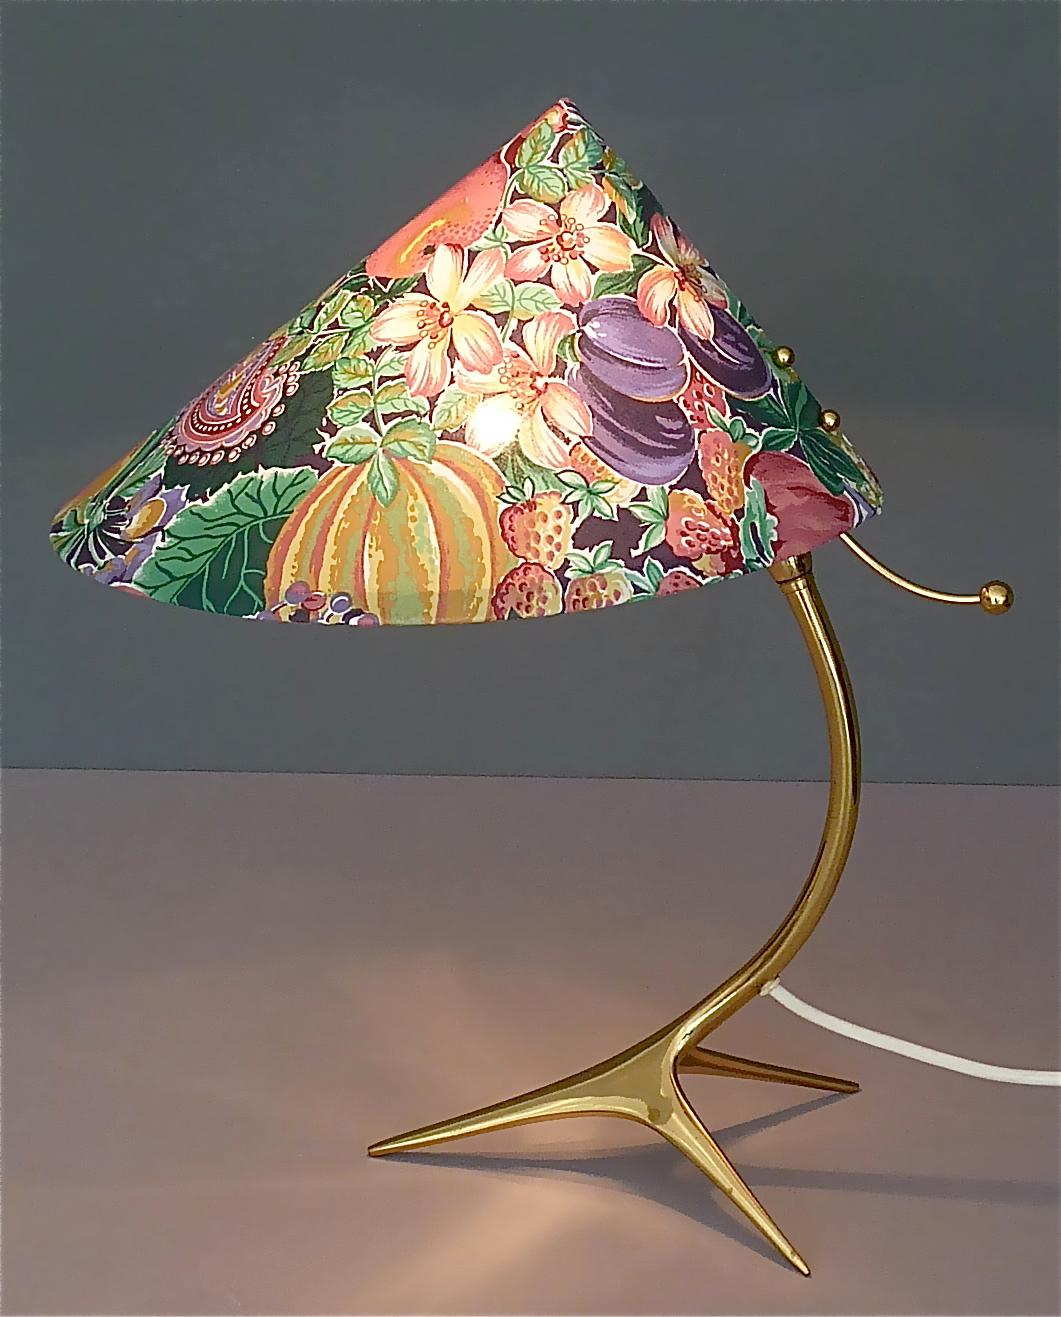 Amazing midcentury tripod brass table lamp in the style of Josef Frank, Kalmar or Nikoll, Austria or Germany, 1950s. The organic design brass tripod lamp base comes with its original but new refurbished fabric shade with a colorful fruits and